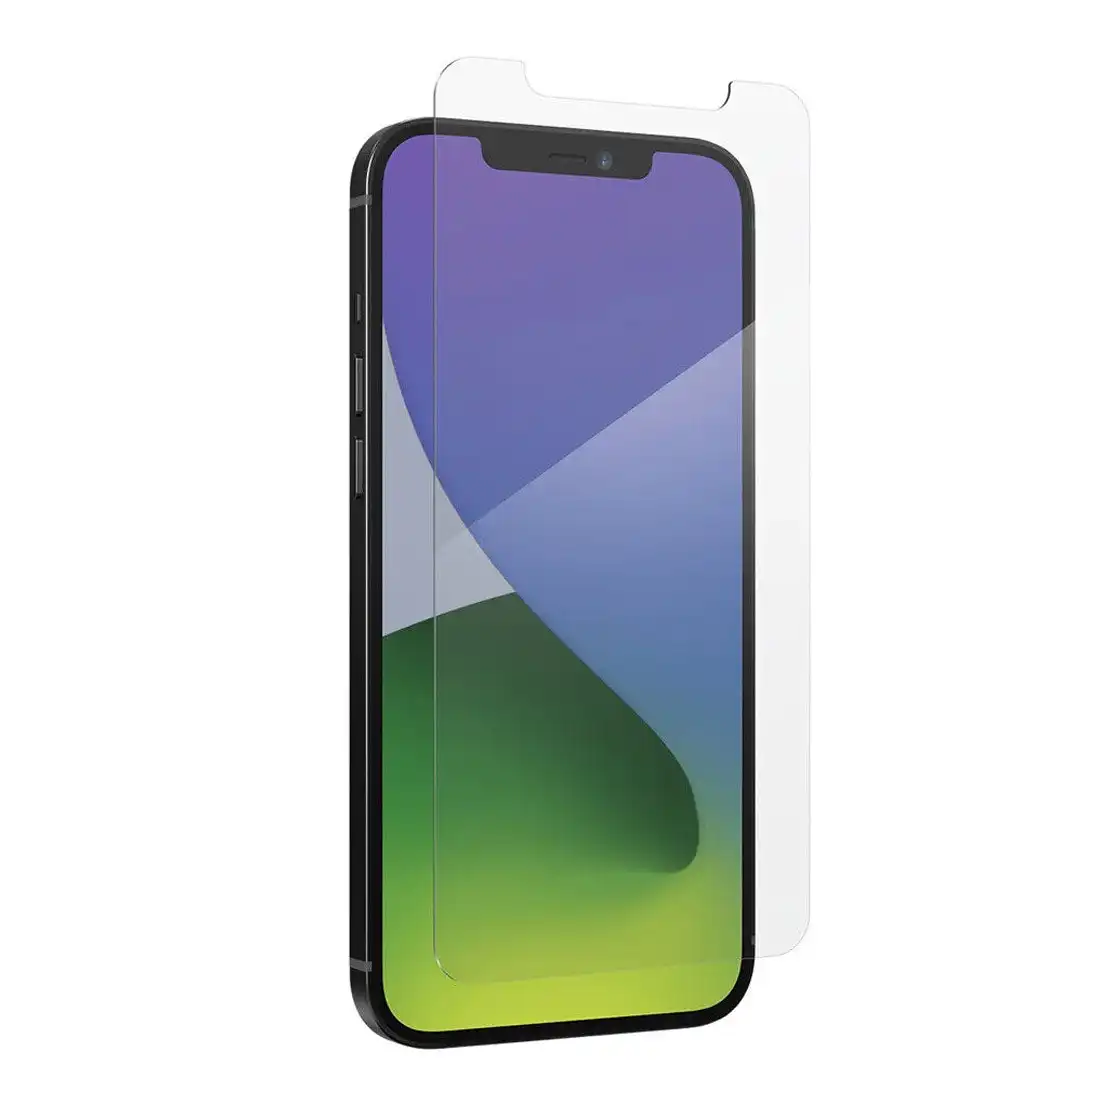 Zagg InvisibleShield Glass Elite VisionGuard+ Screen Protector for iPhone 12 Pro Max